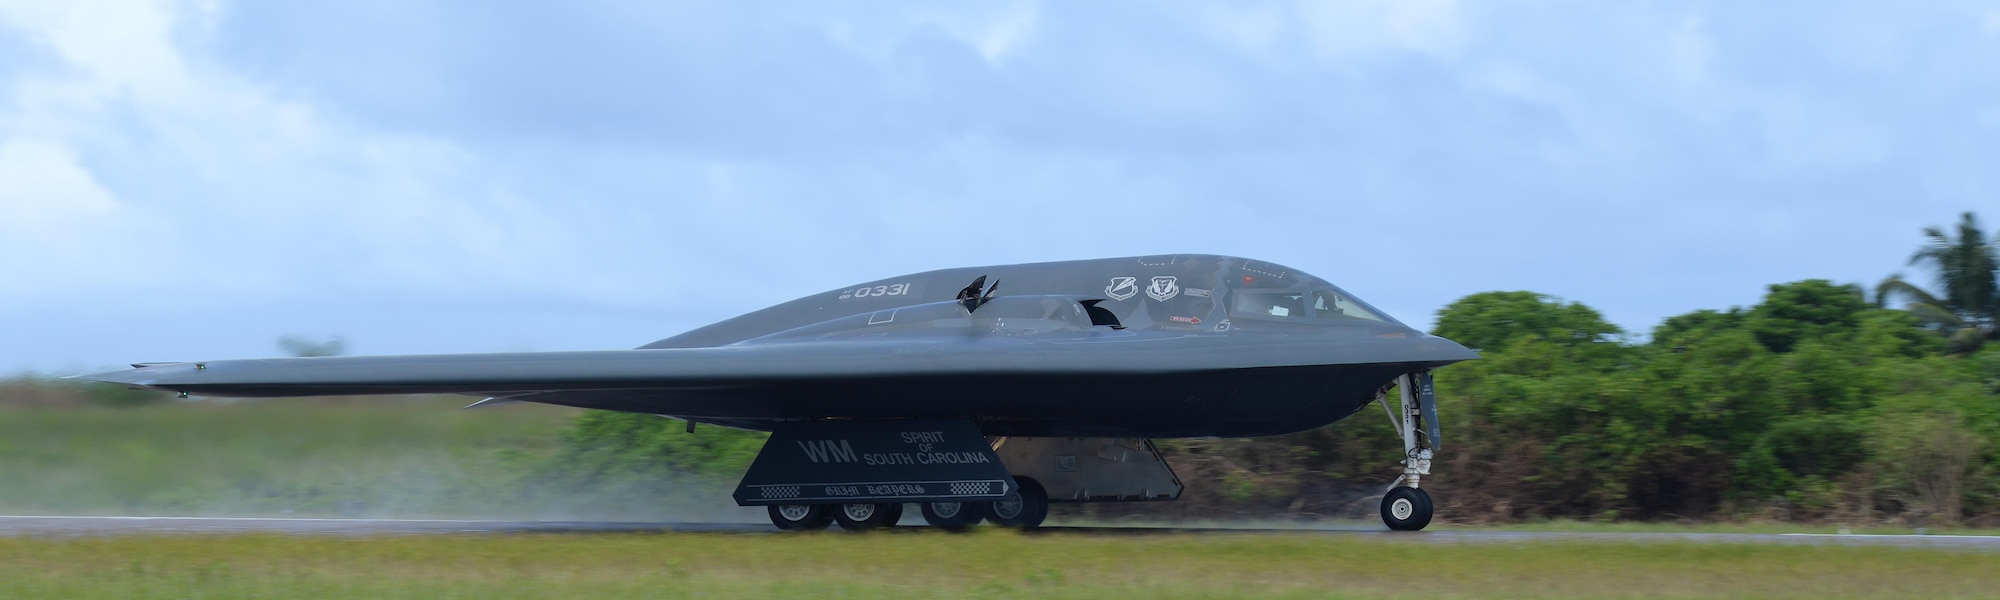 A B-2 Spirit from Whiteman Air Force Base, Mo., takes off from an undisclosed location in the U.S. Pacific Command area of operations March 10, 2016. Bomber crews routinely deploy to maintain a high state of readiness and crew proficiency while integrating capabilities with key regional partners. (U.S. Air Force photo by Senior Airman Joel Pfiester/Released)